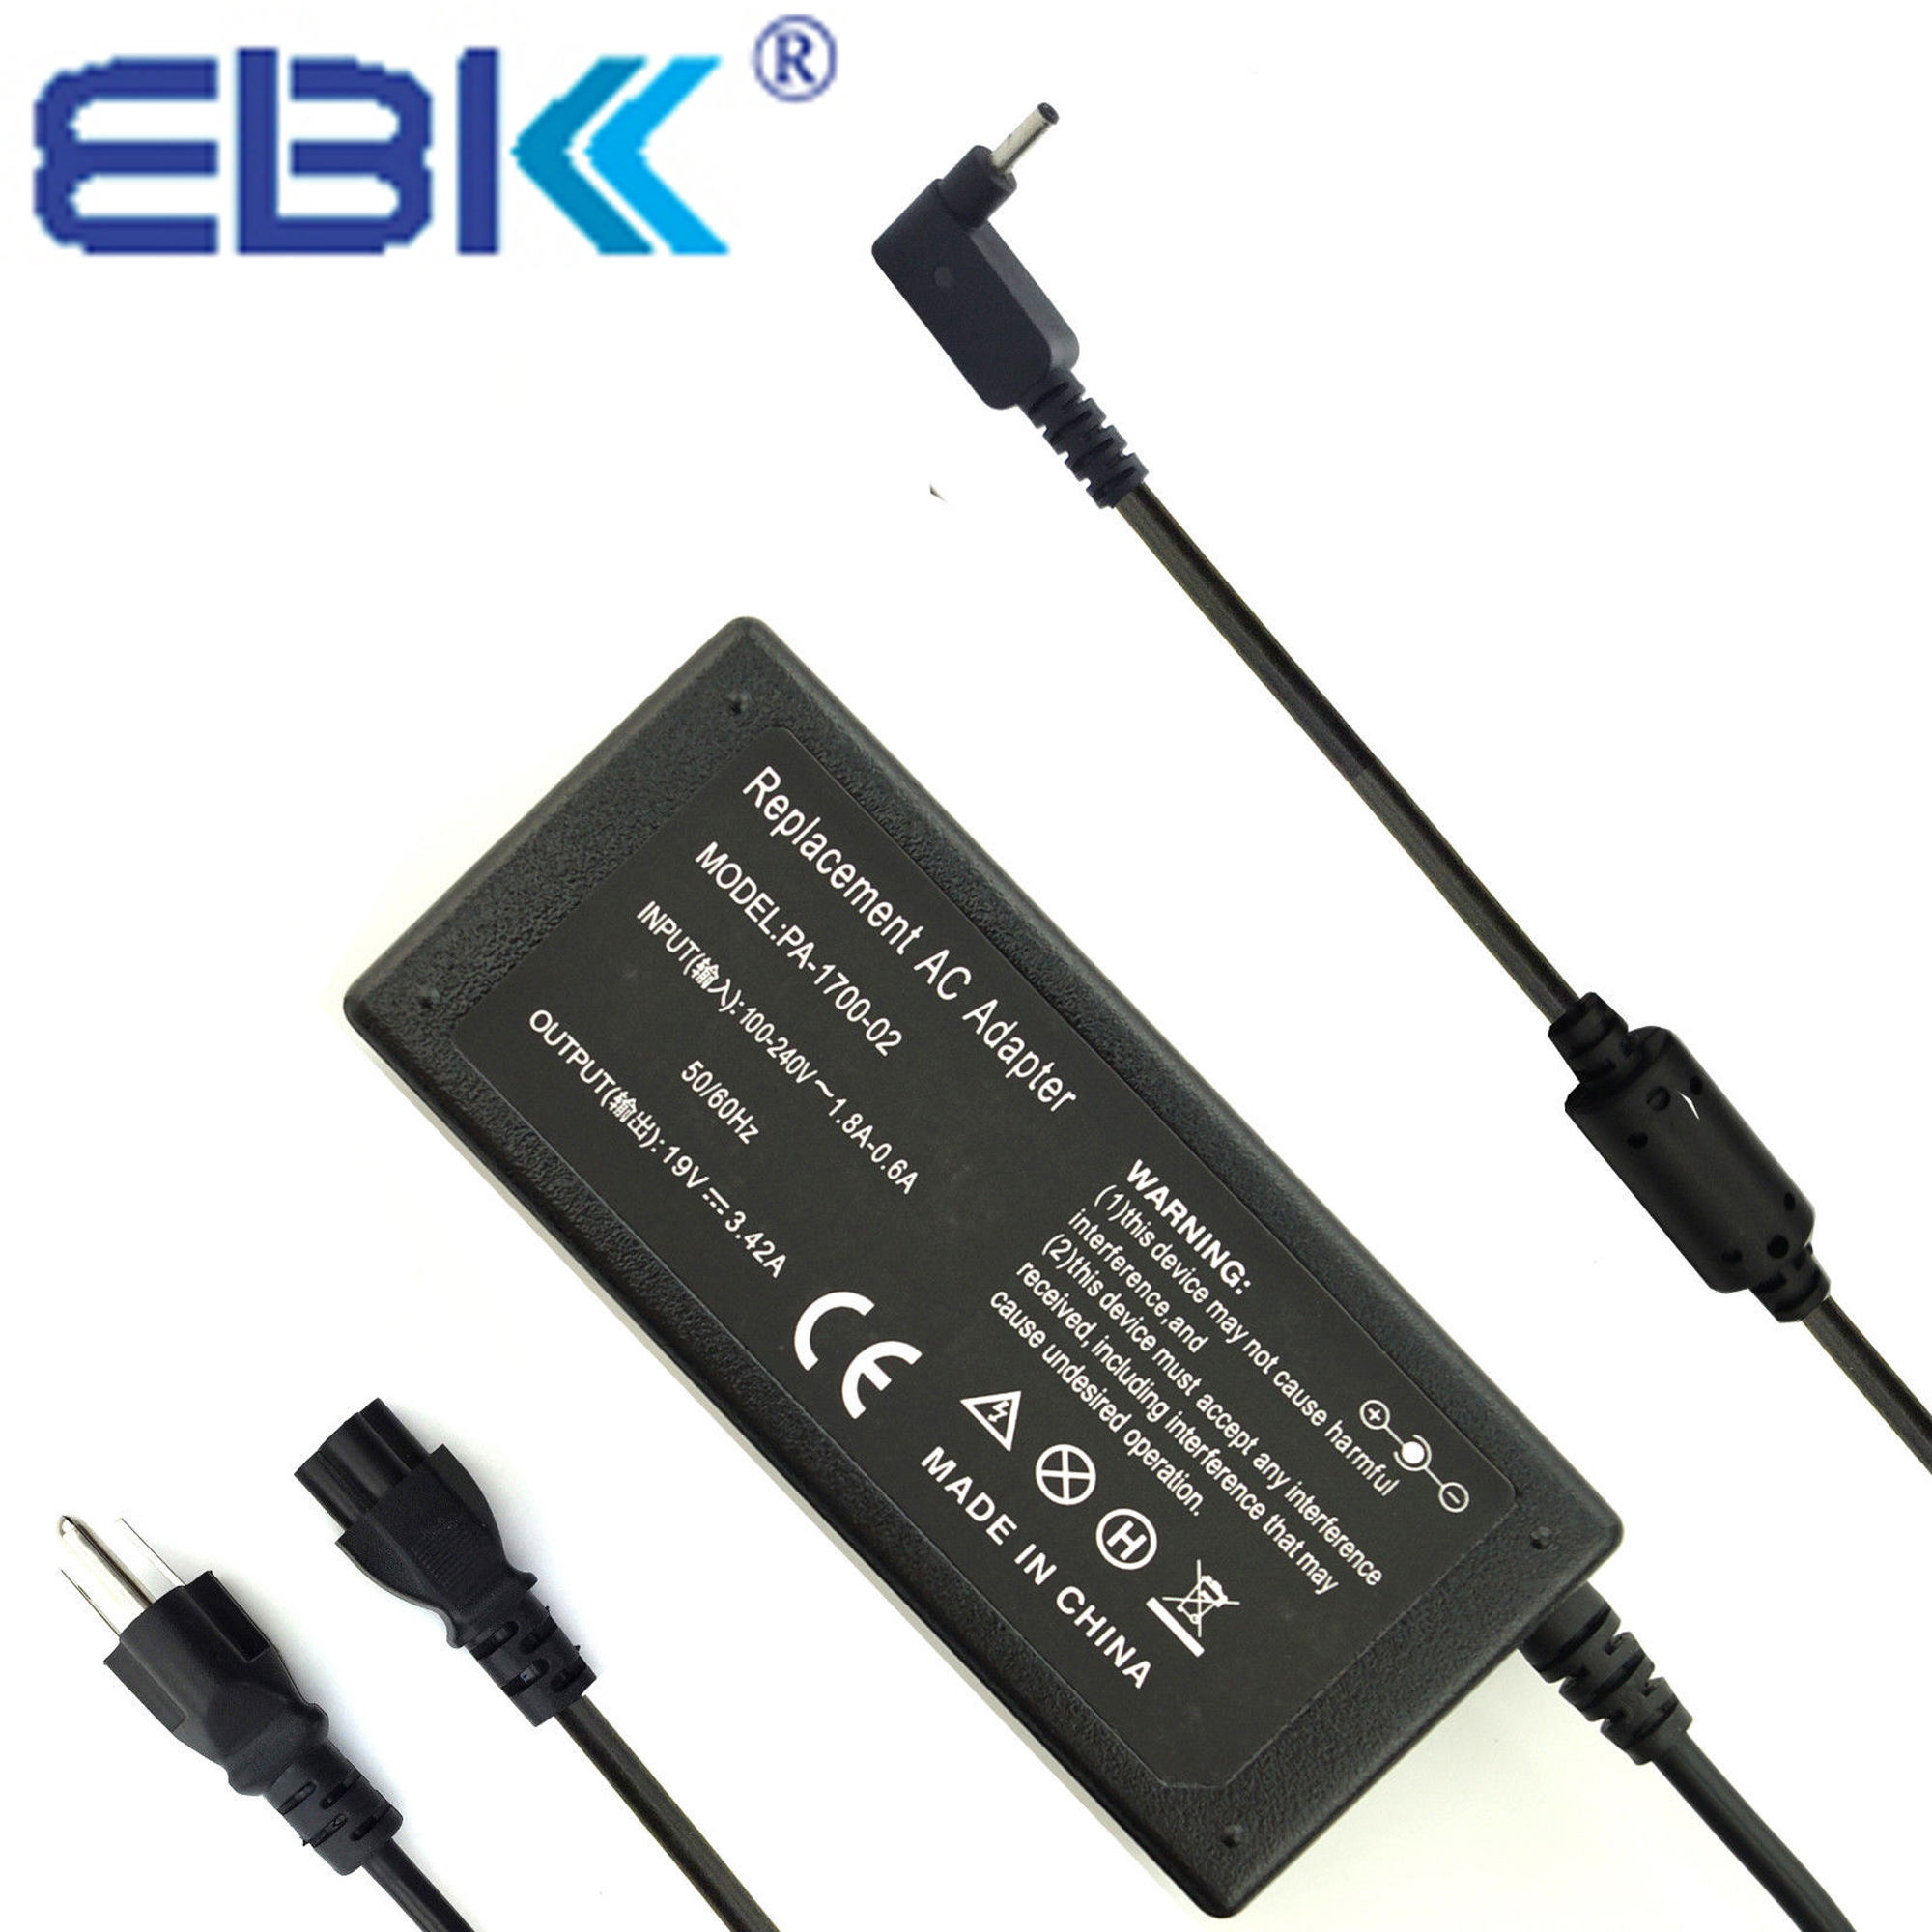 EBK 65W 3.42A laptop Adapter Charger for Acer Aspire S7 P3 S5 S7-392 S7-391 R13 R7 R14 R5 V3 P3-131, Acer TravelMate X313 TMX313-M-6824,Aspire One Cloudbook 14 AO1-431 Series - image 1 of 7